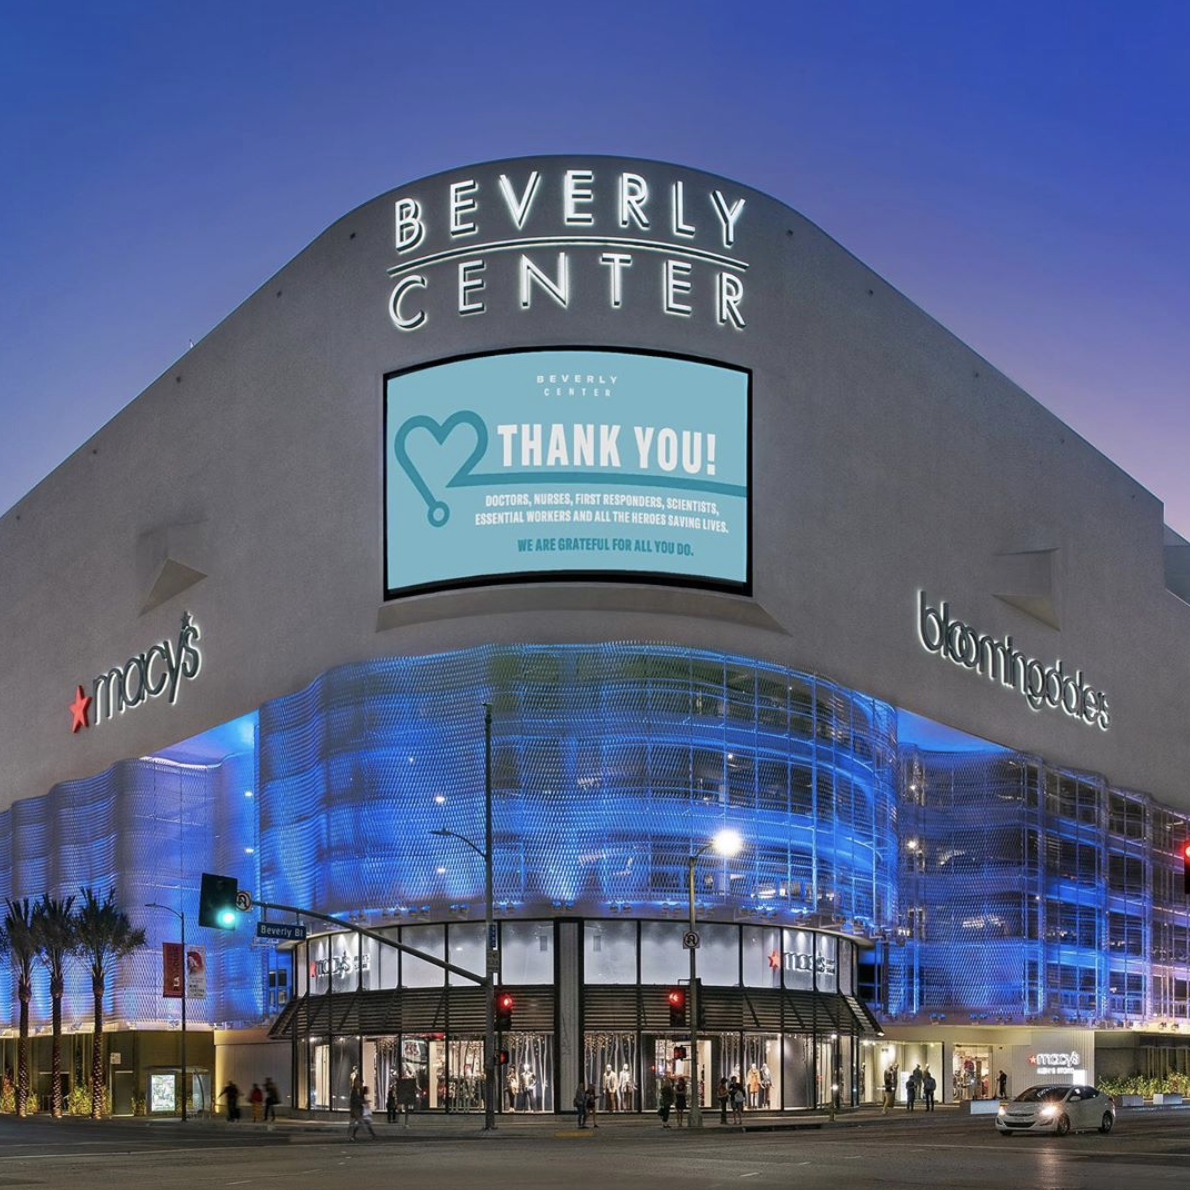 Beverly Center Shopping Mall in Los Angeles